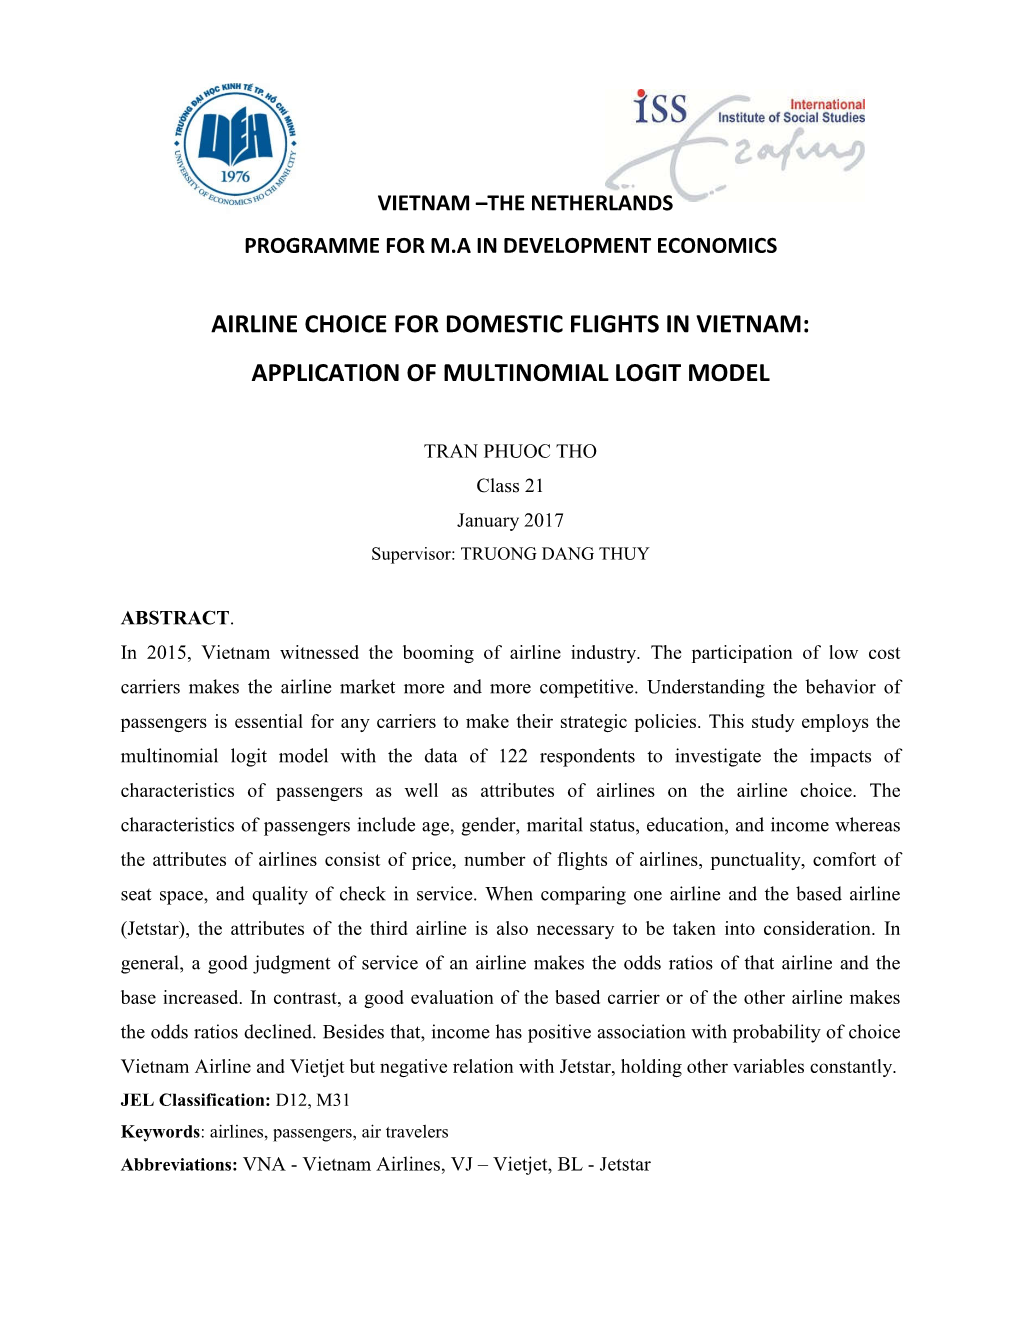 Airline Choice for Domestic Flights in Vietnam: Application of Multinomial Logit Model